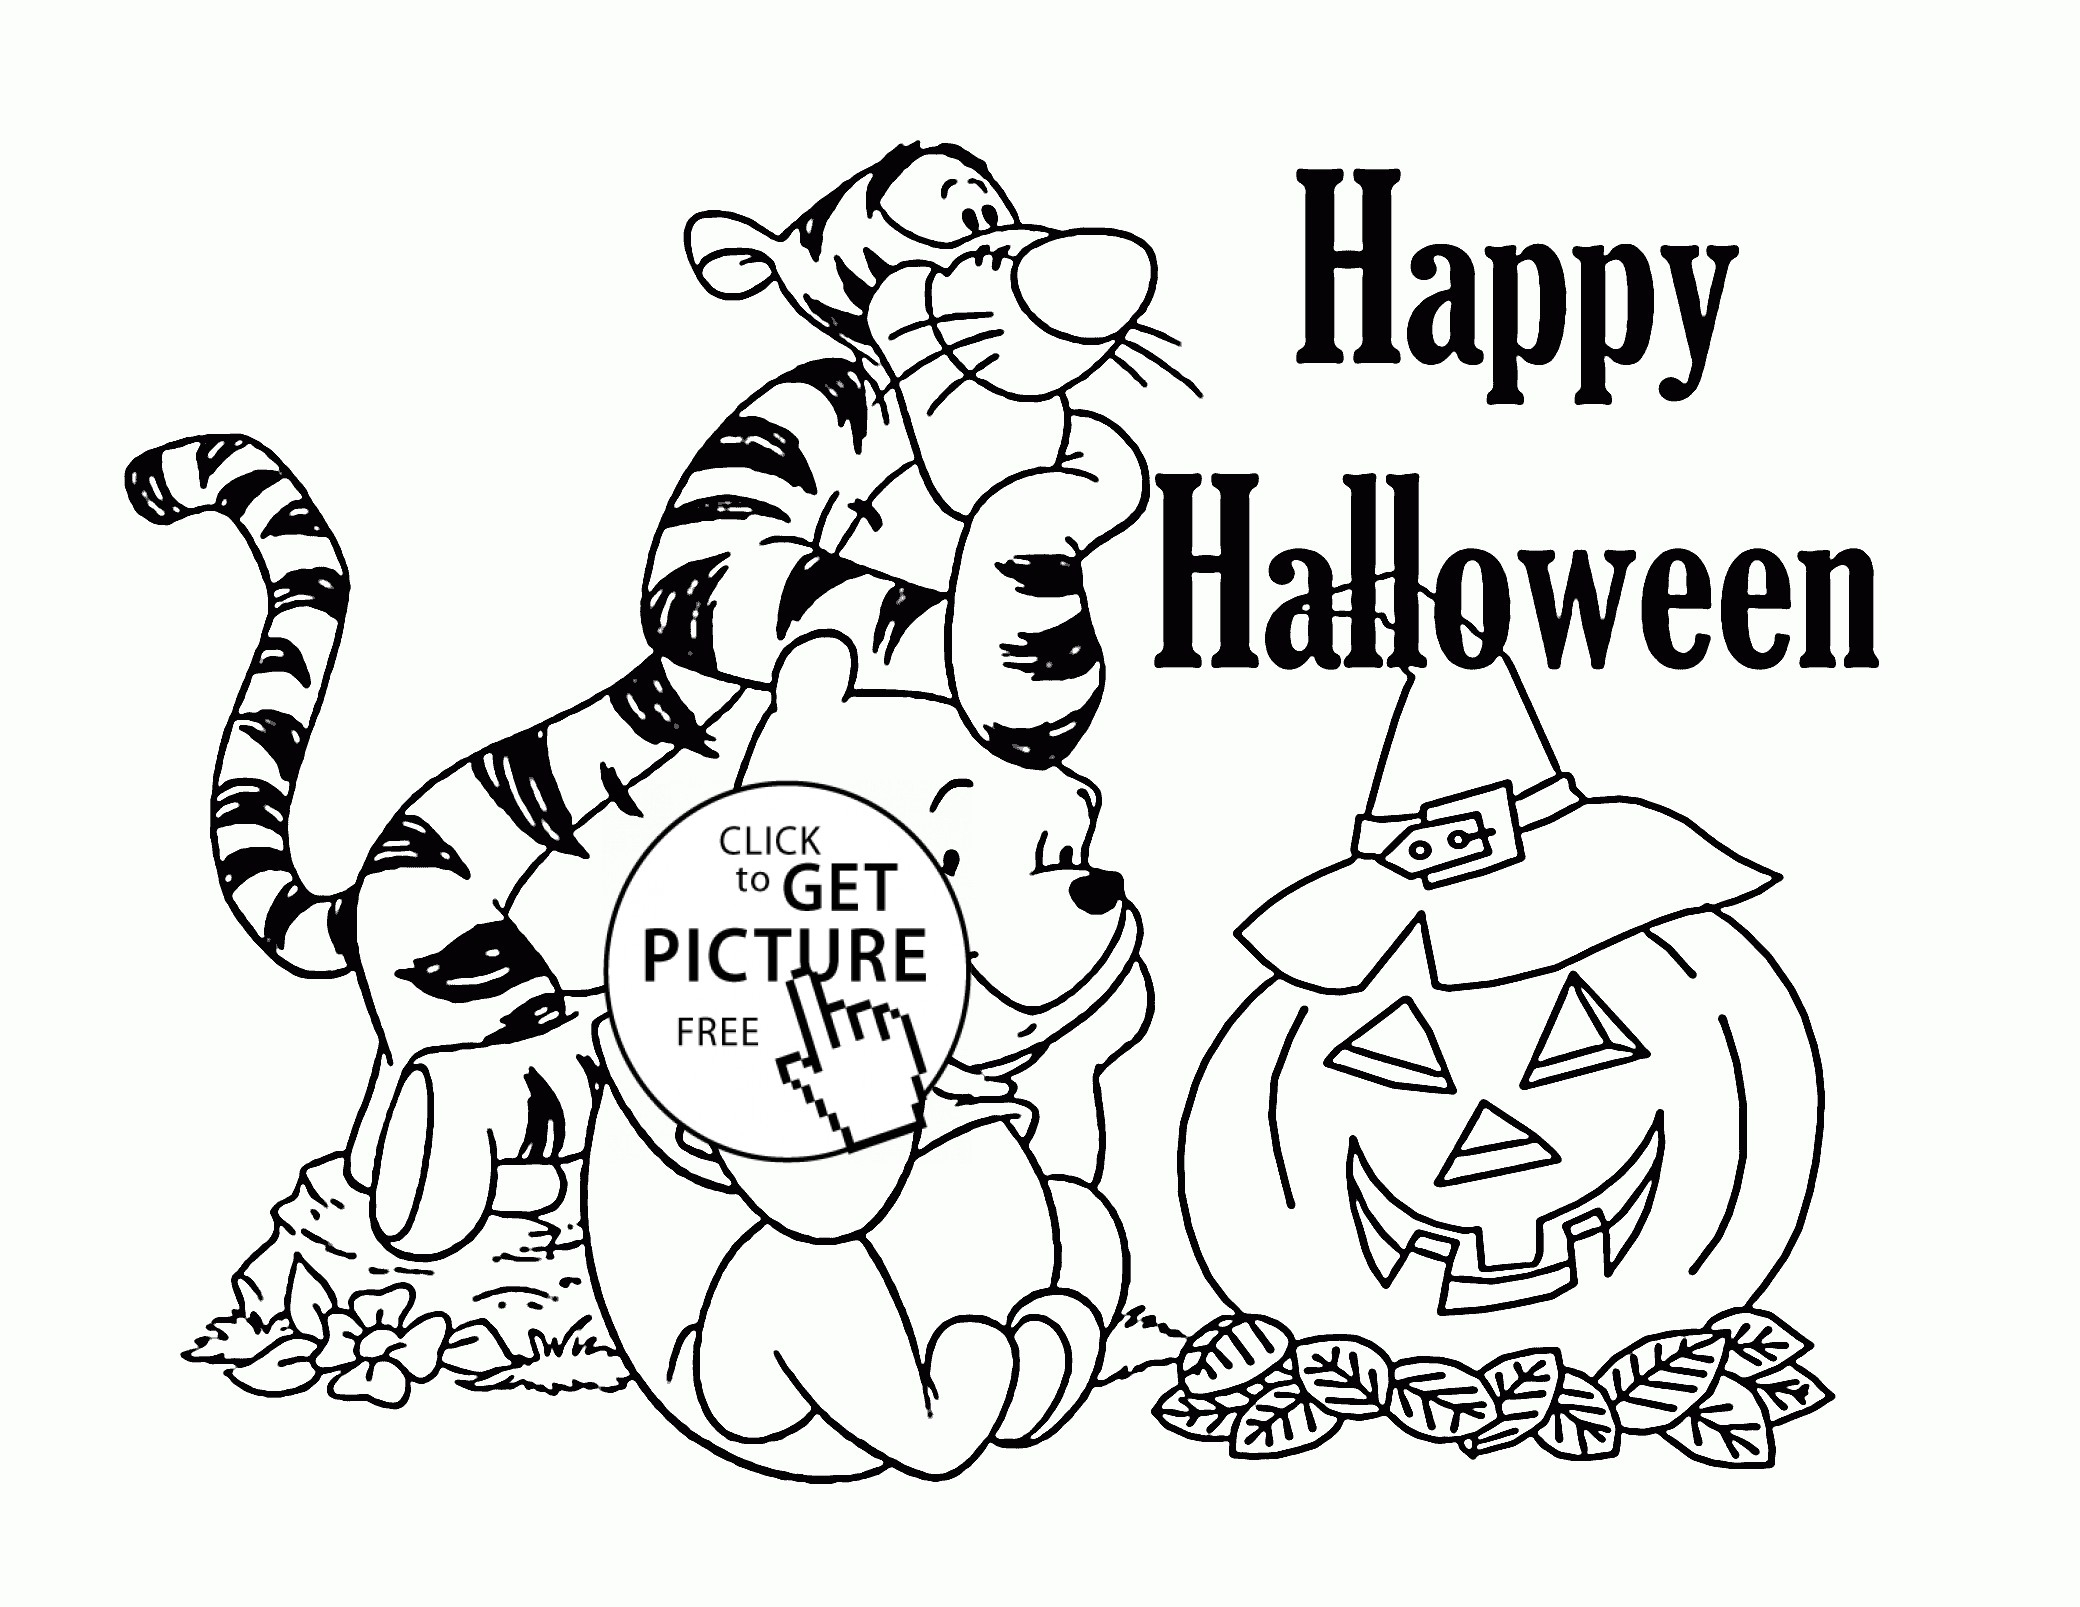 Oriental Trading Halloween Coloring Pages at GetColorings